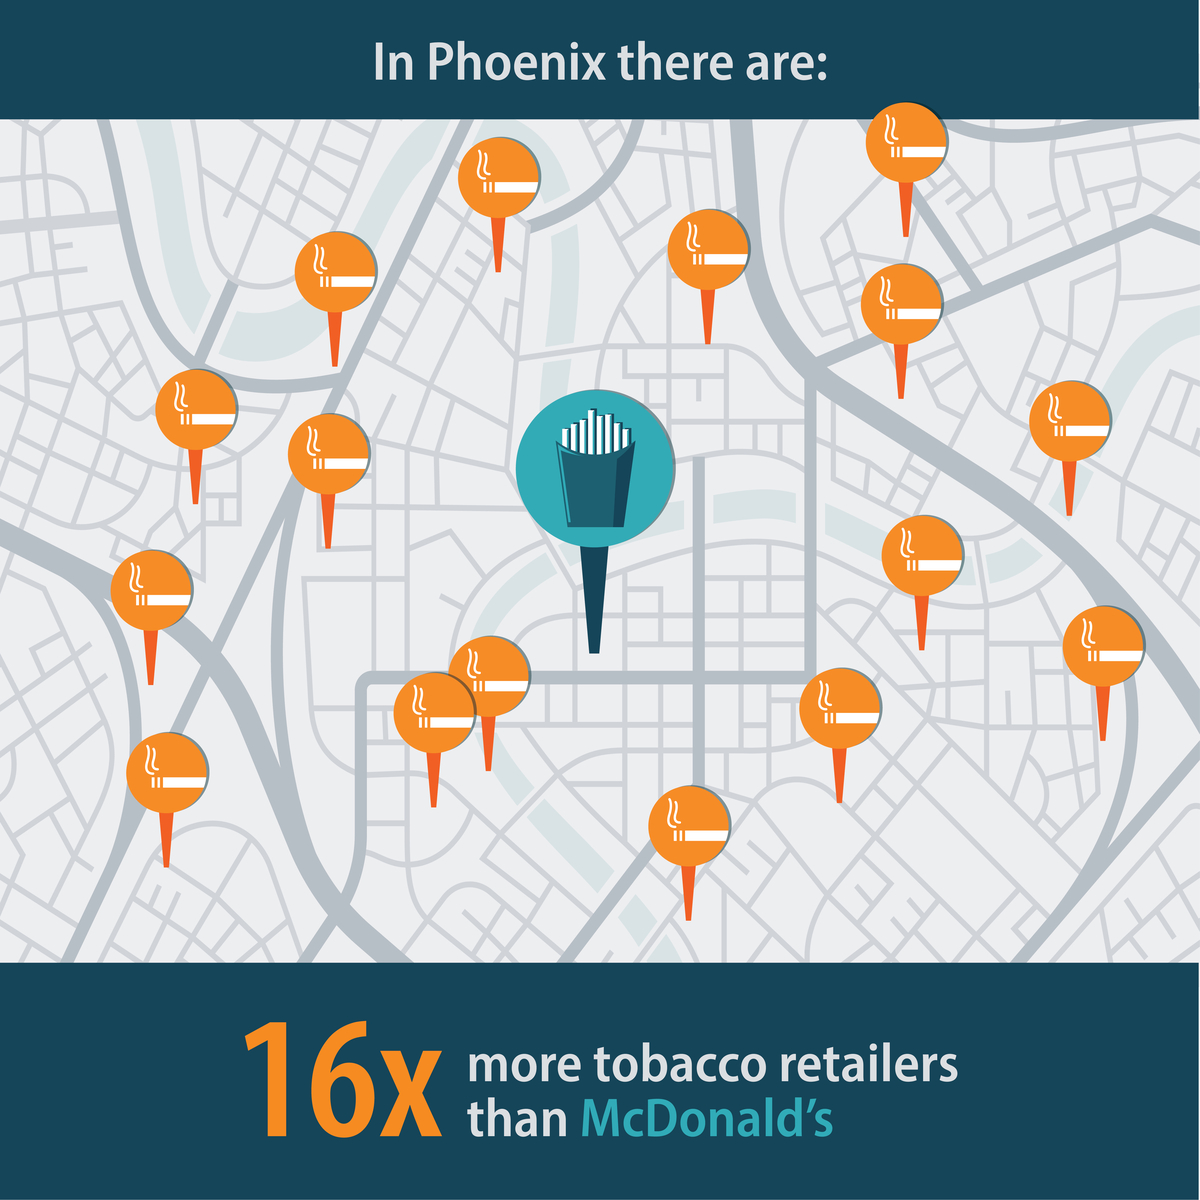 In Phoenix there are: 16 times more tobacco retailers than McDonald's